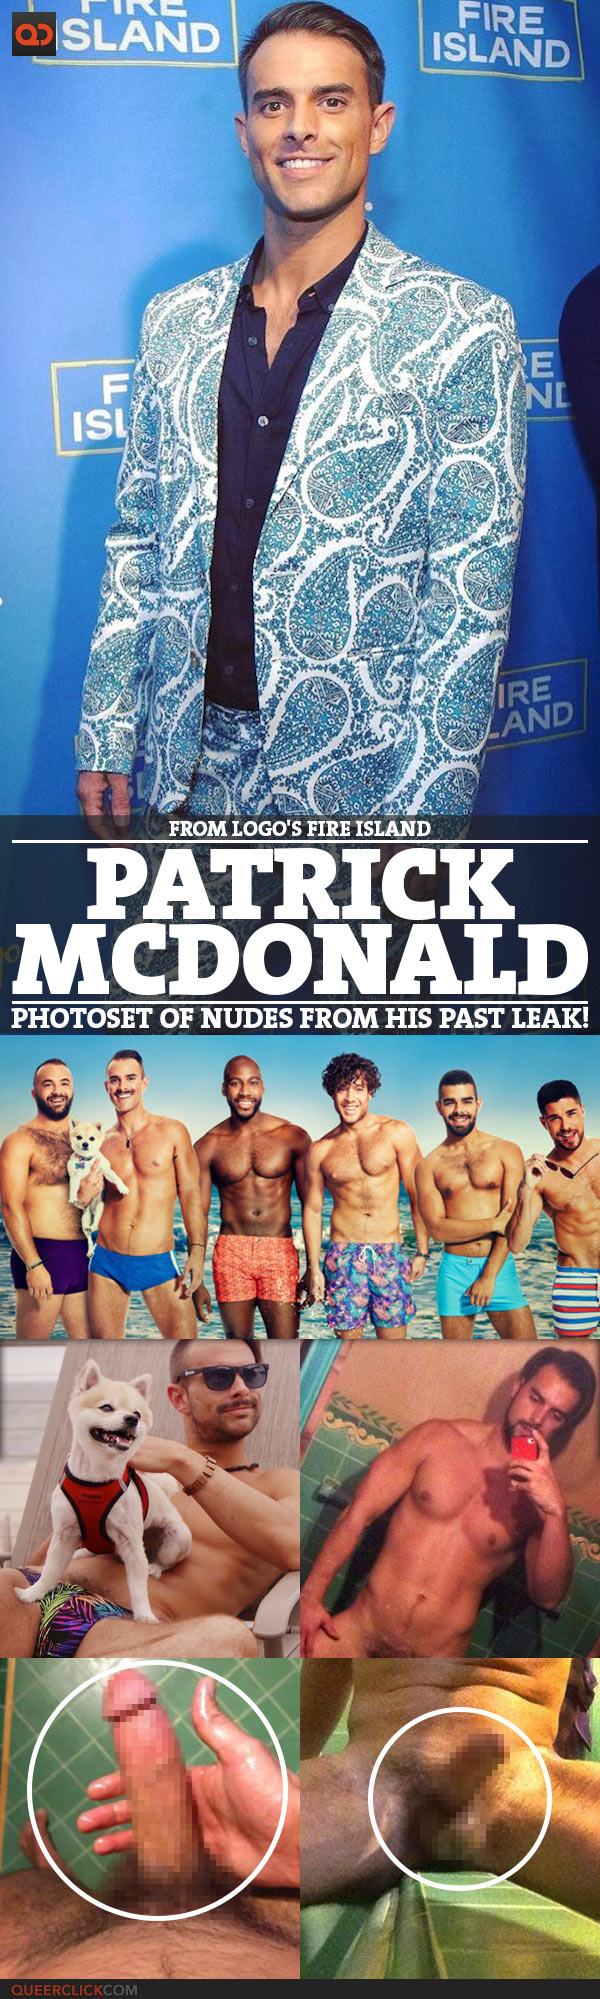 Patrick McDonald, From Logos Fire Island, PhotoSet Of Nudes From His Past Leak! image